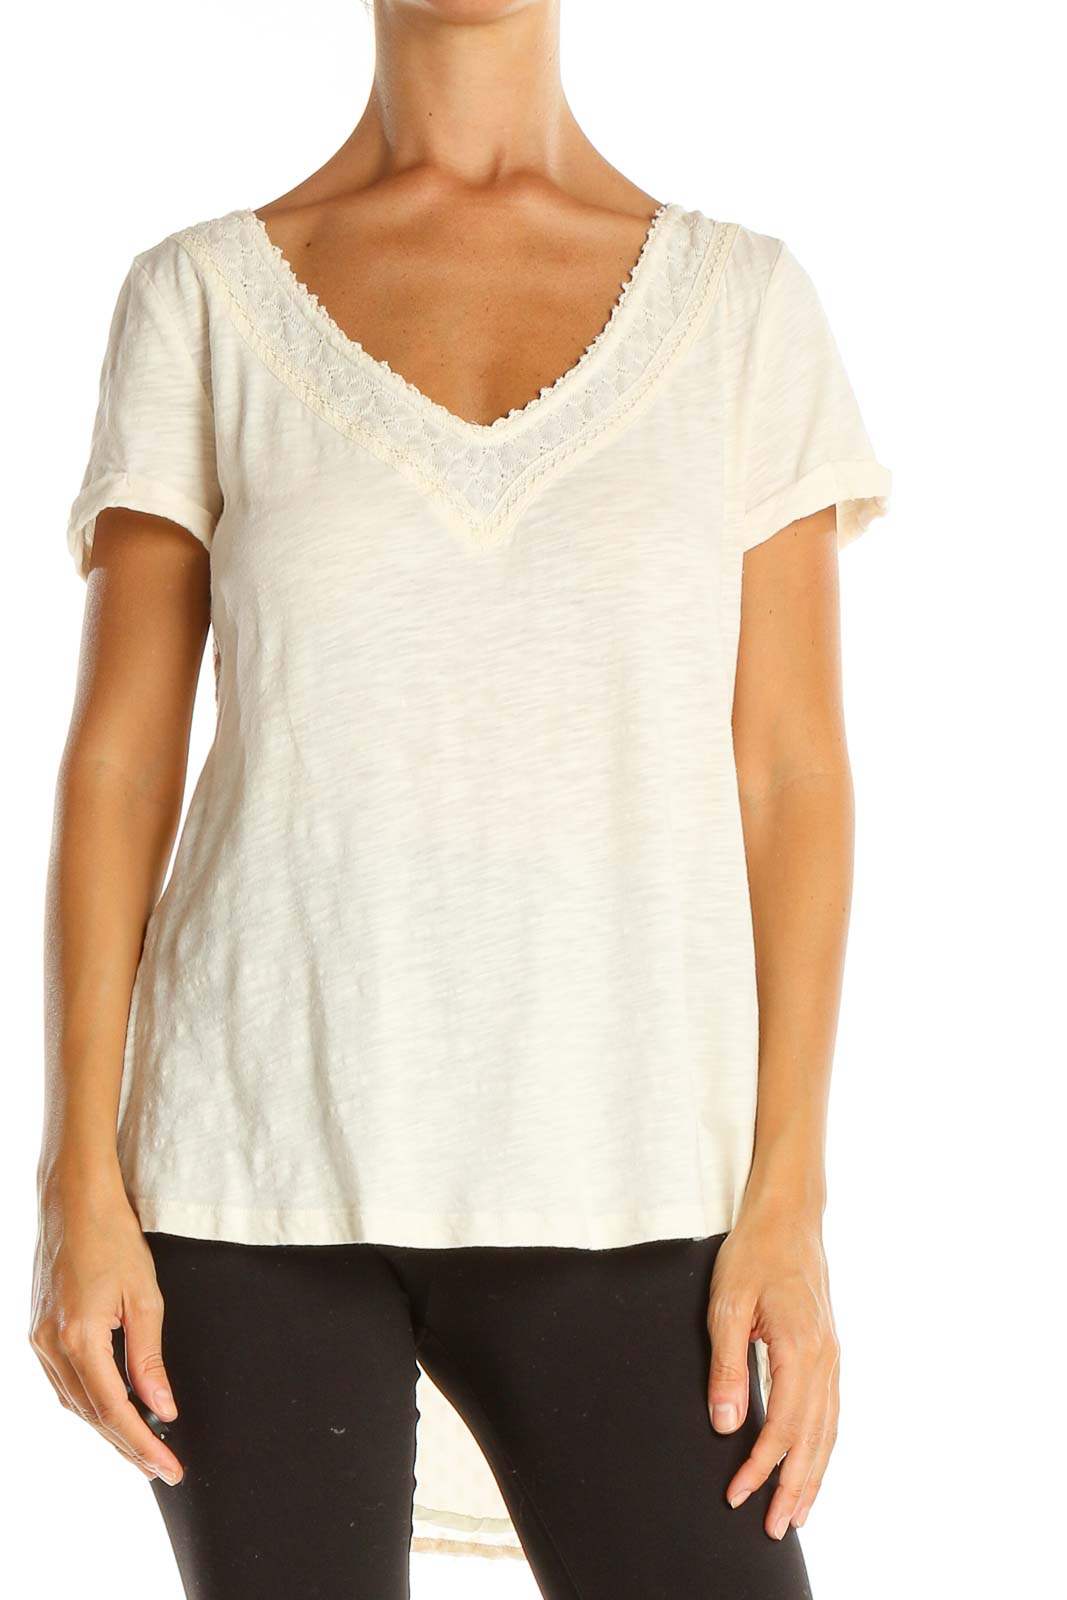 White Casual Top With Lace Detail Front